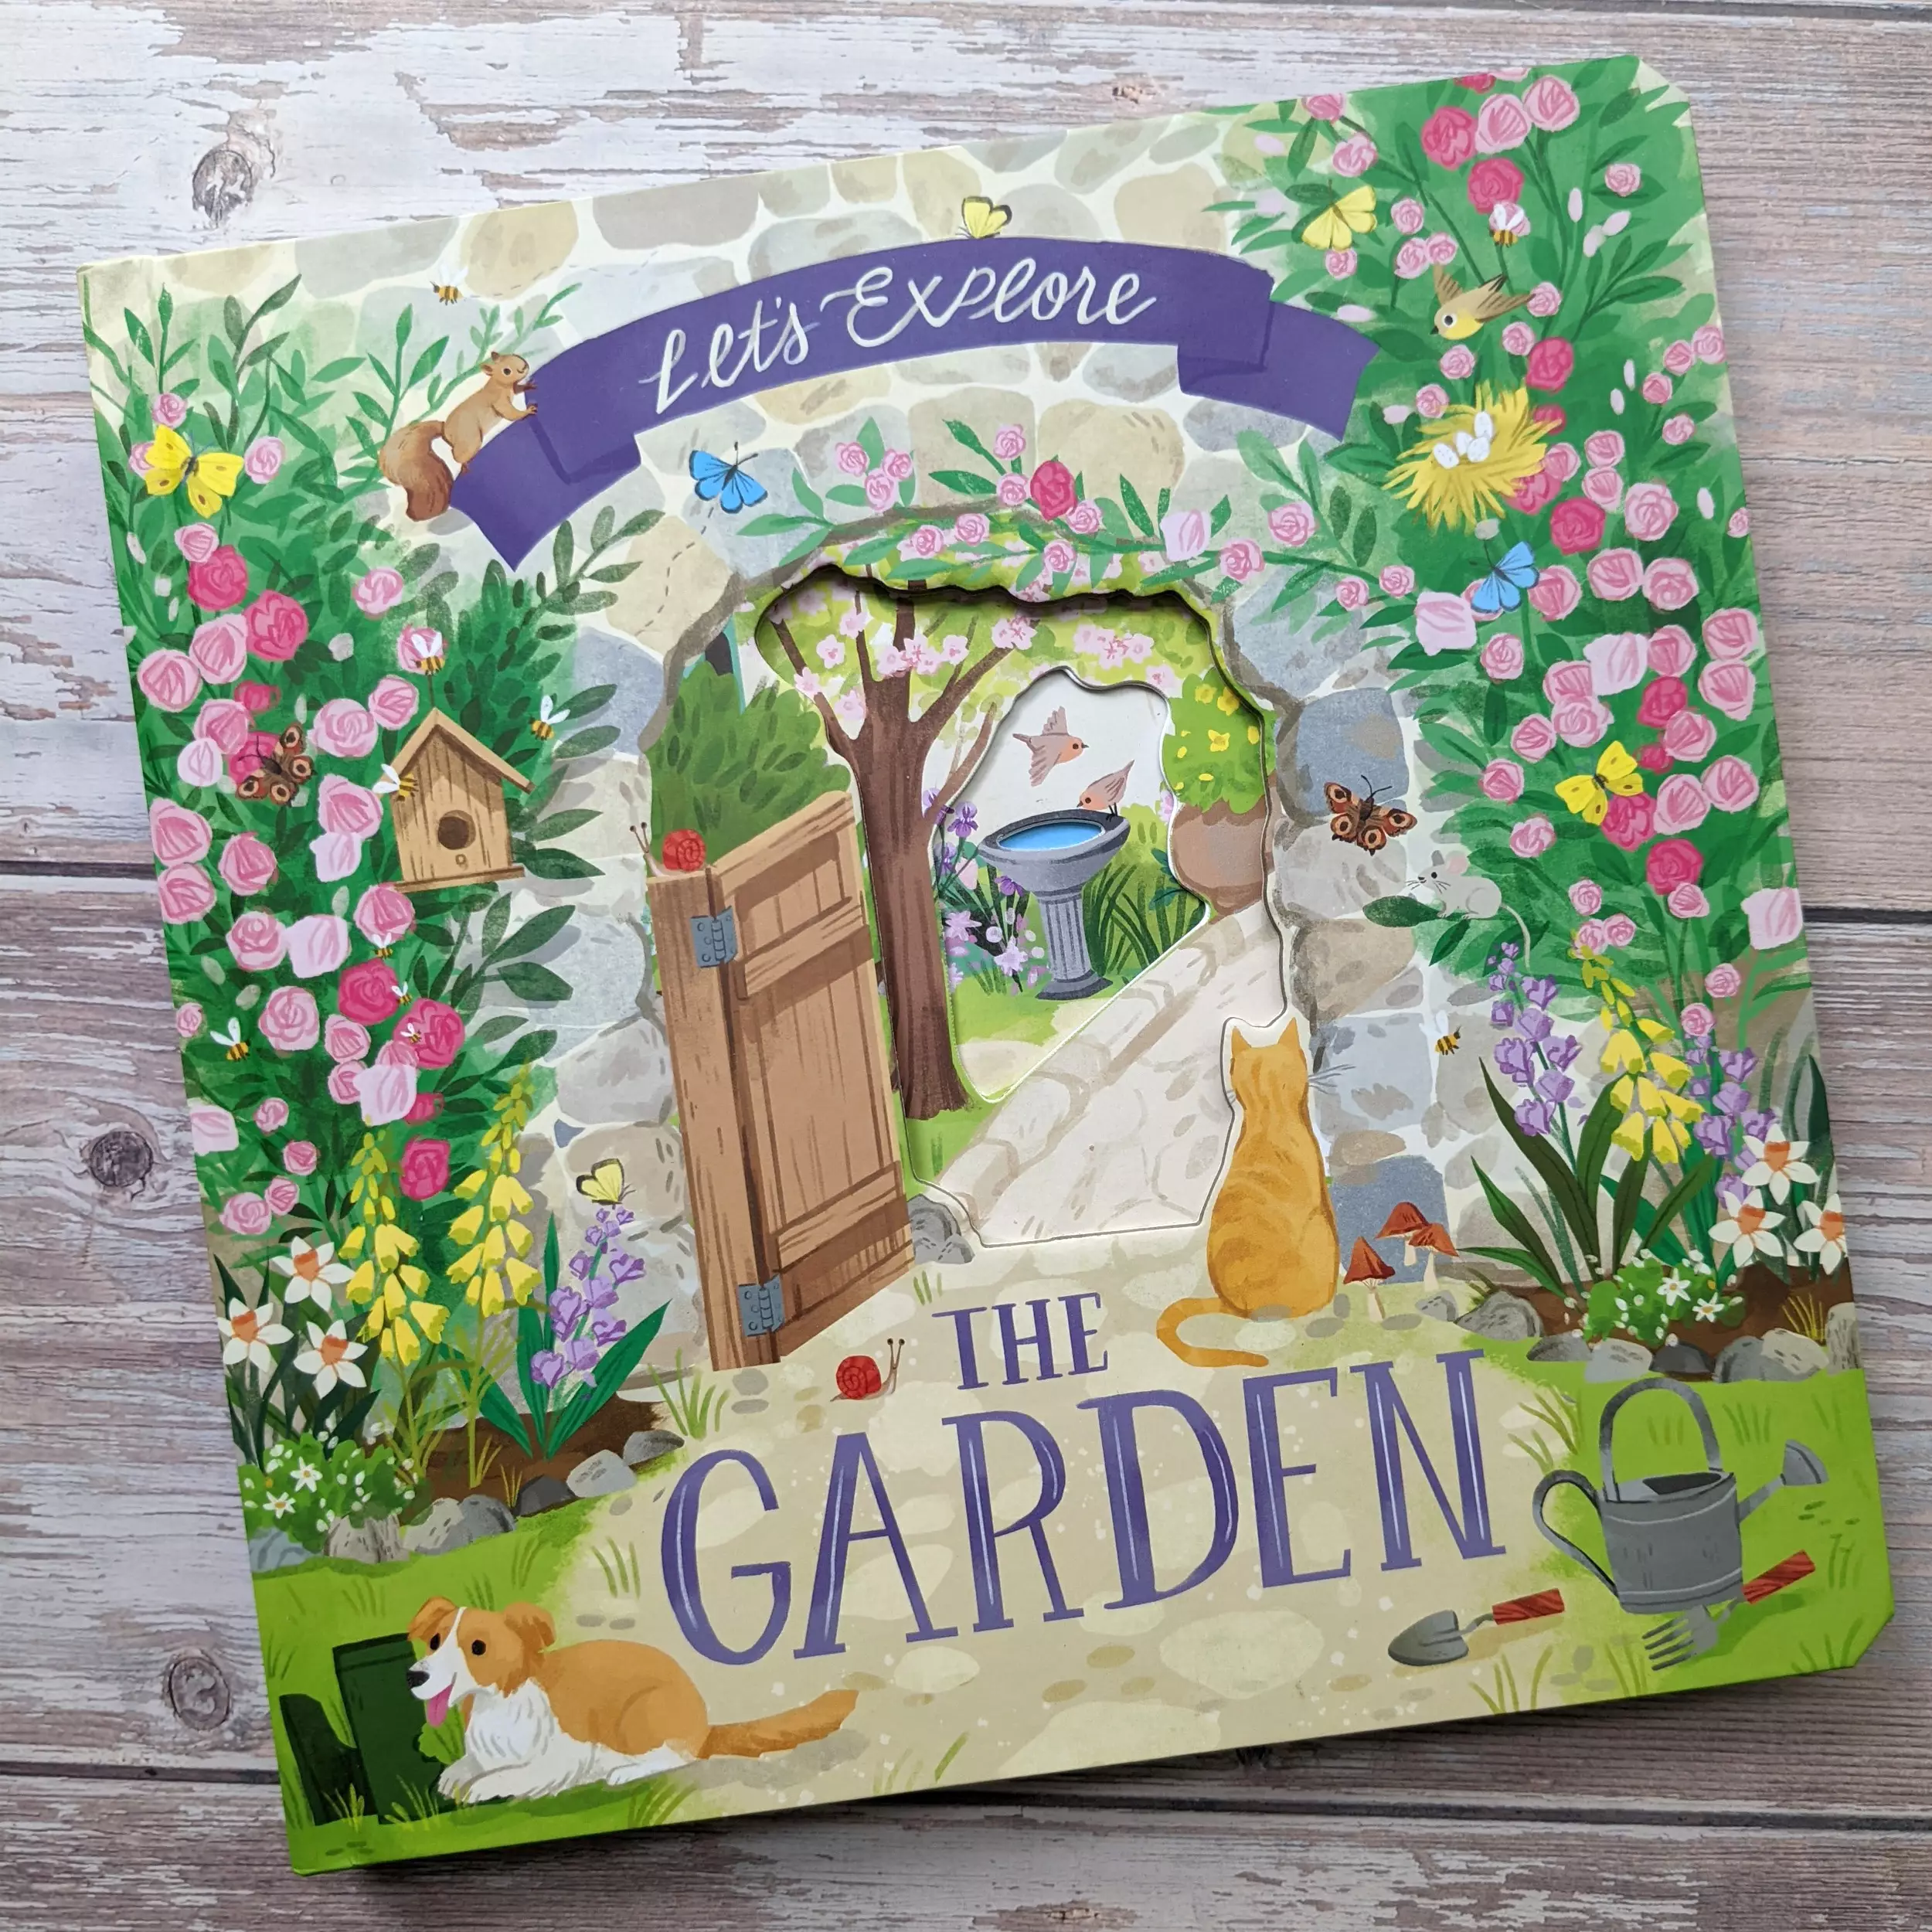 Let's Explore the Garden | Free Delivery at Eden.co.uk